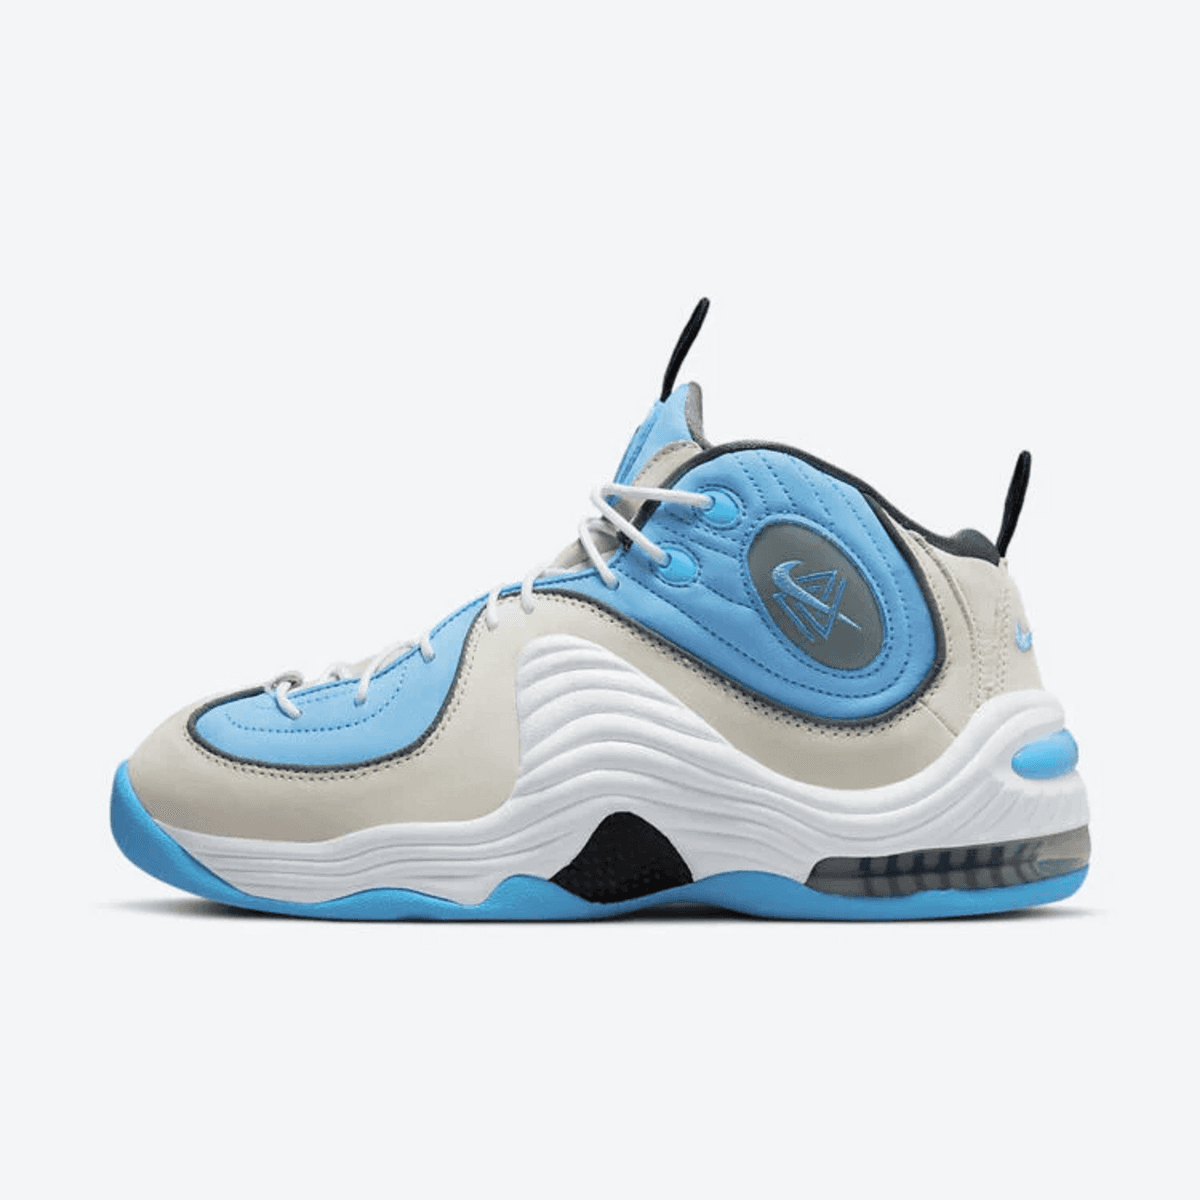 Nike Is Collaborating With Social Status with the Release of the Air Penny 2 in University Blue